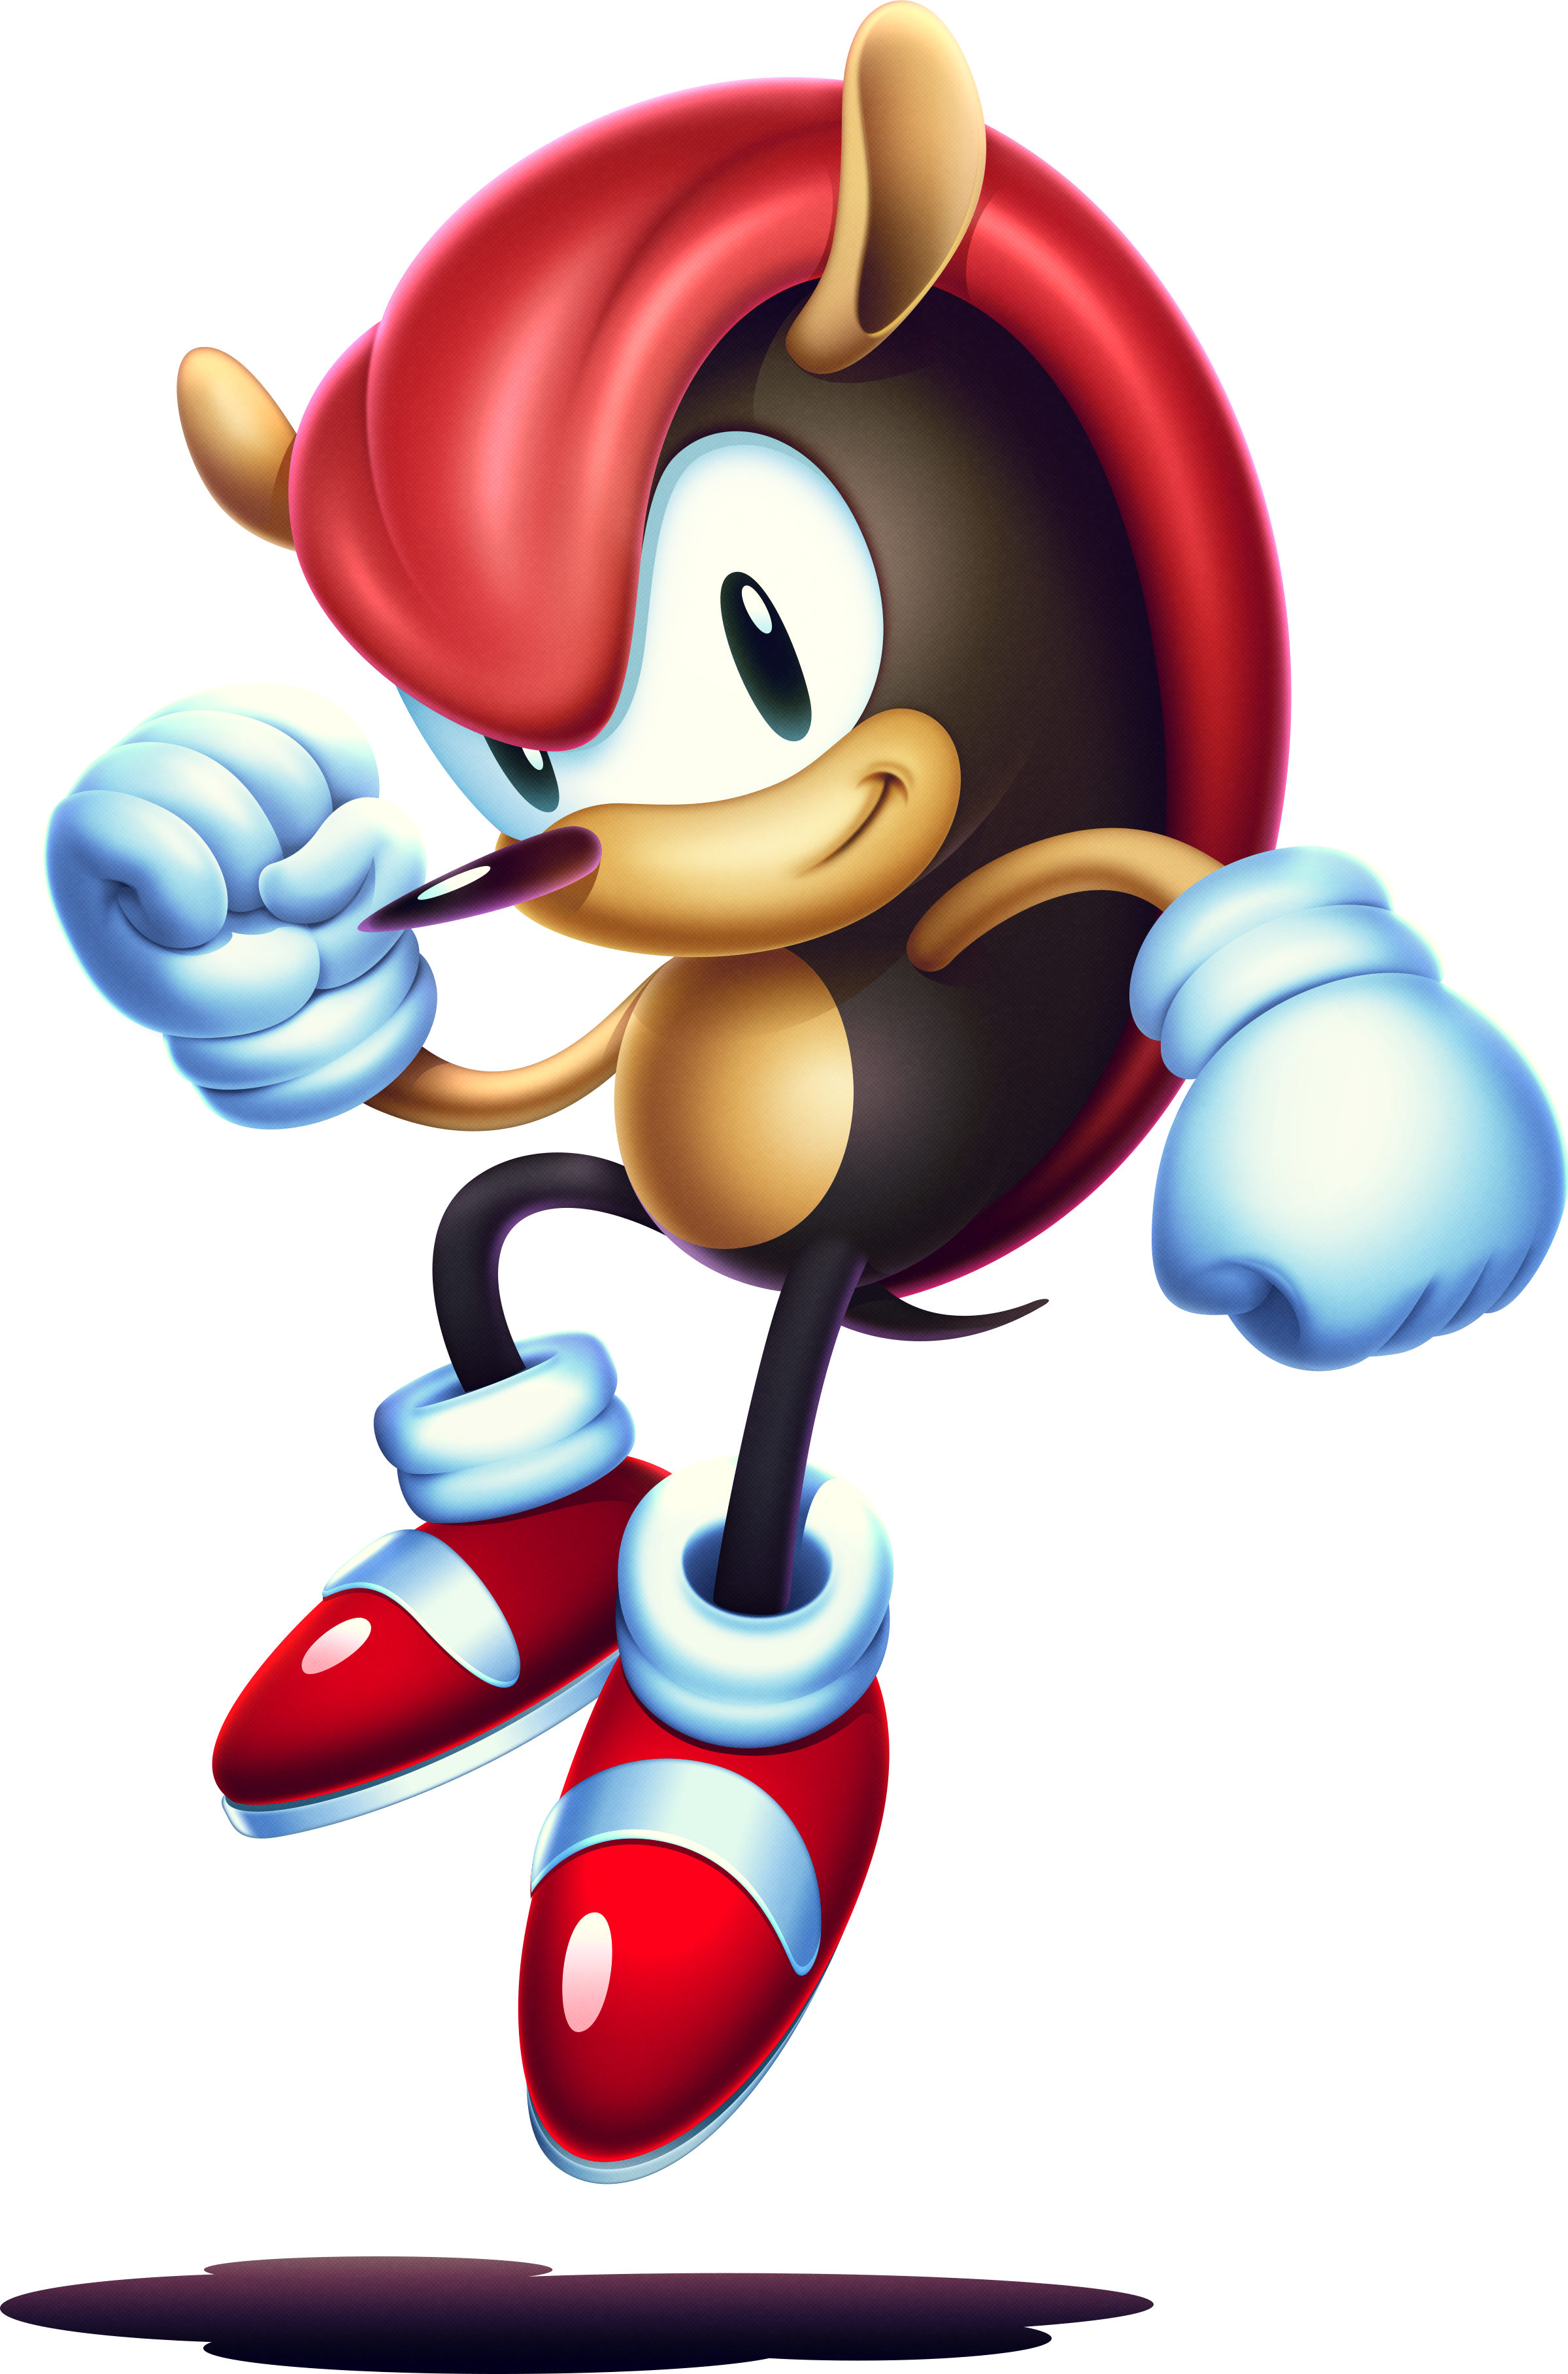 https://vignette.wikia.nocookie.net/sonic/images/4/4a/SonicMania_Mighty.png/revision/latest?cb=20180316210727